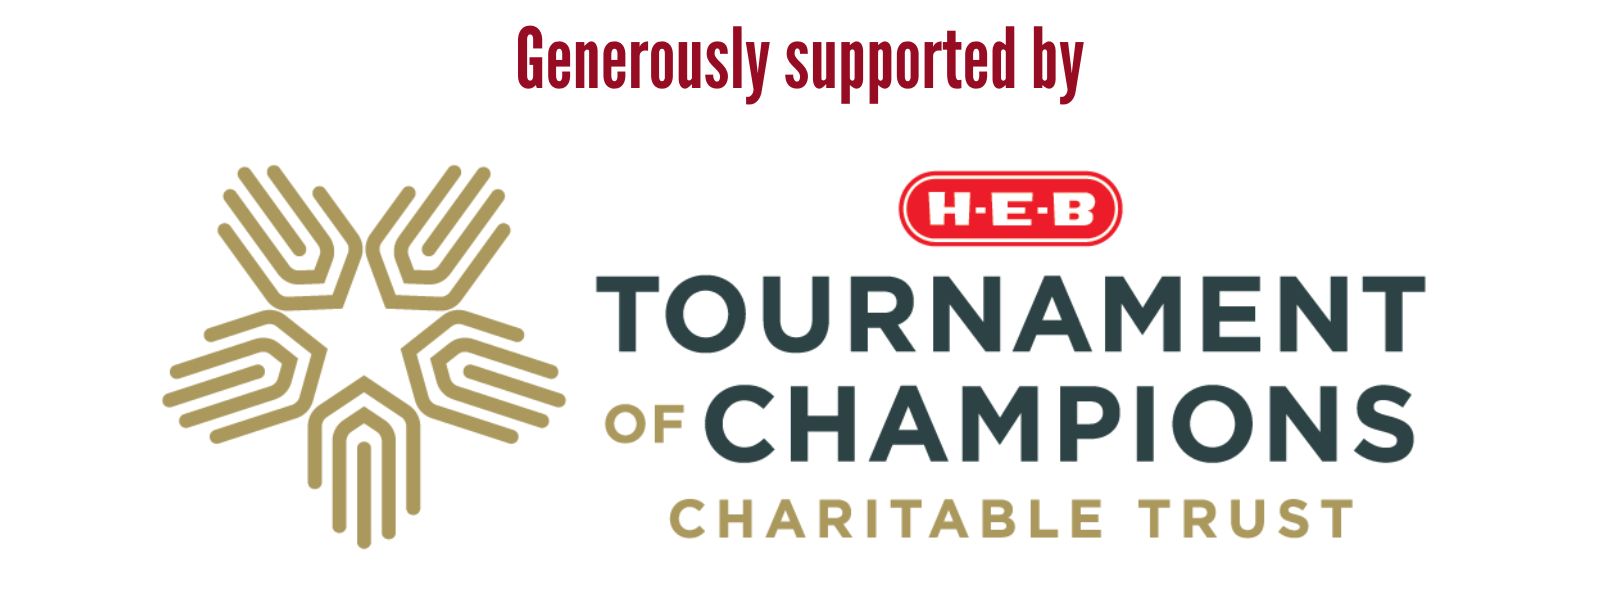 Generously supported by HEB Tournament of Champions Charitable Trust